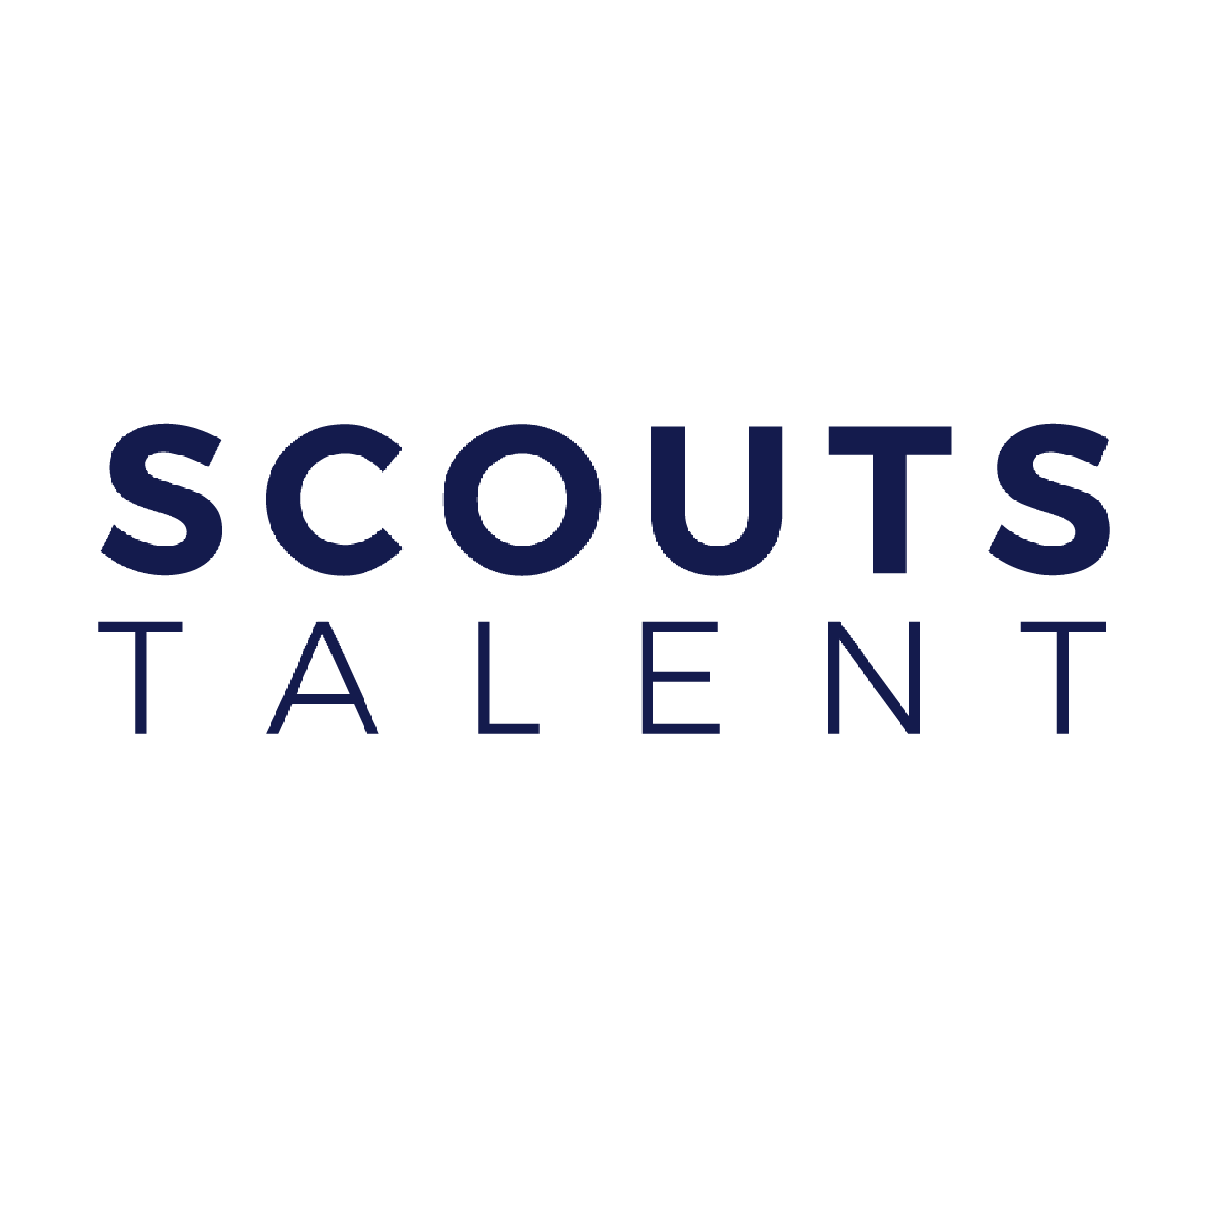 TALENTSCOUTS Recruiting GmbH